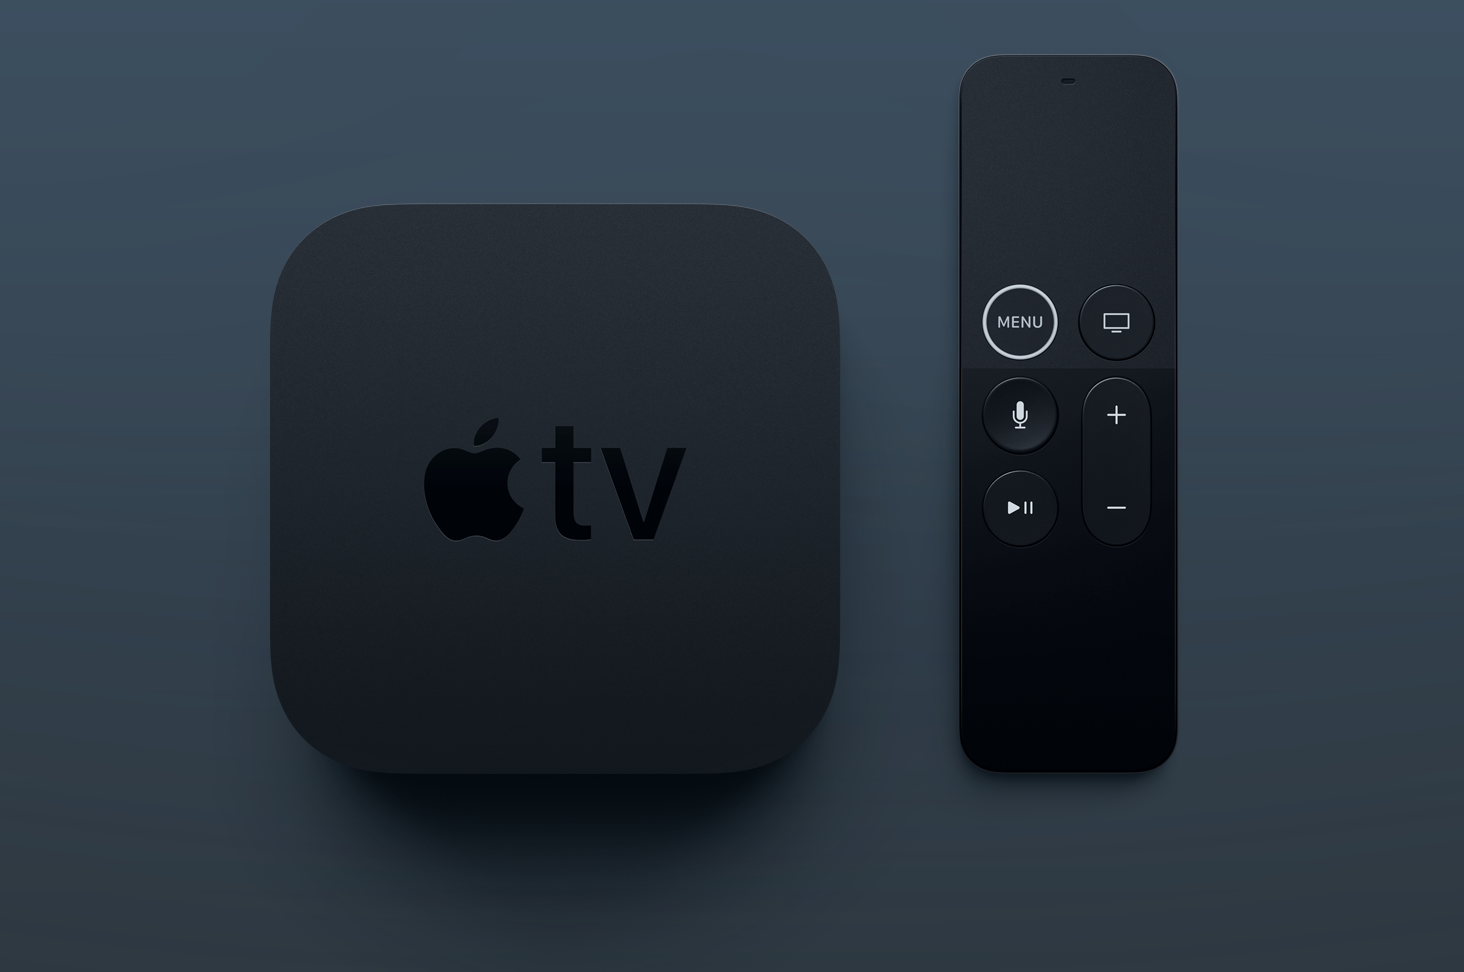 ** The official Apple TV 4K thread (the 2021 model has a new remote and